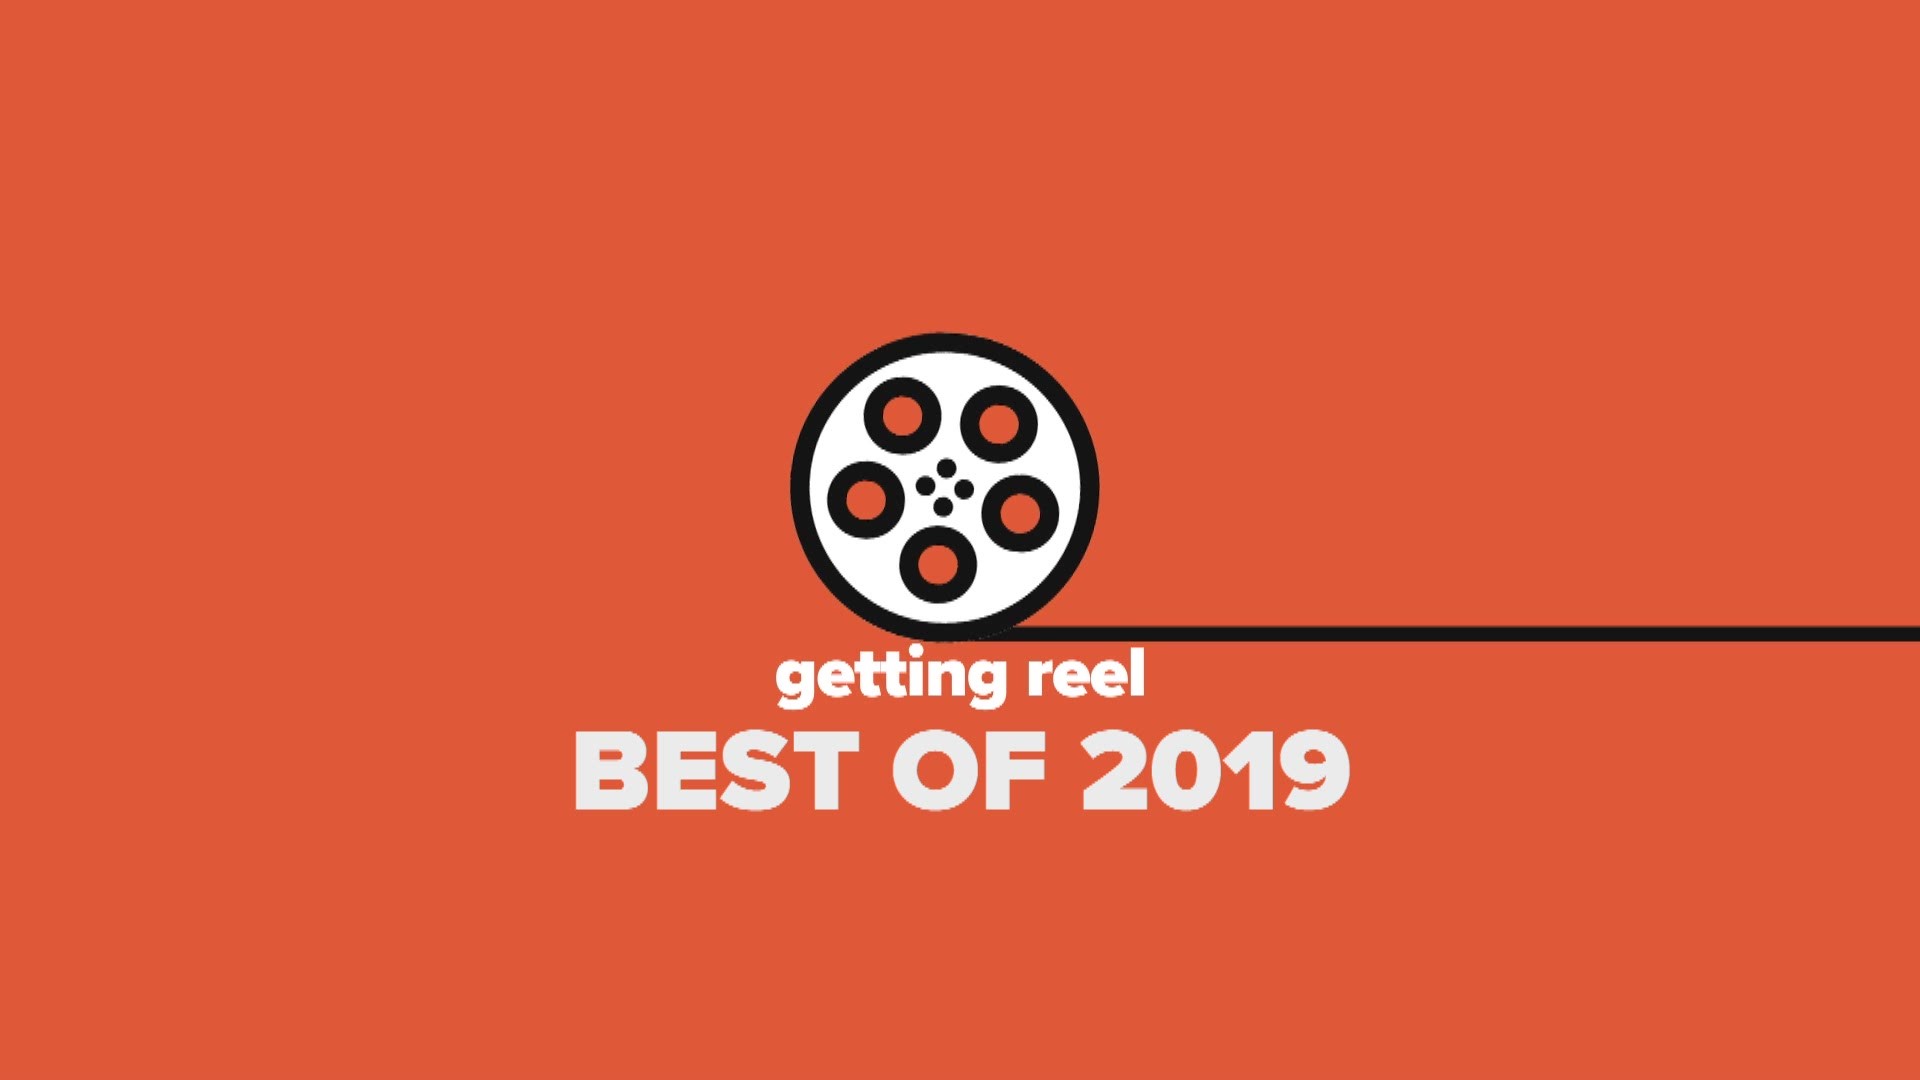 The Getting Reel crew got together to name what they think are the best movies of the year.